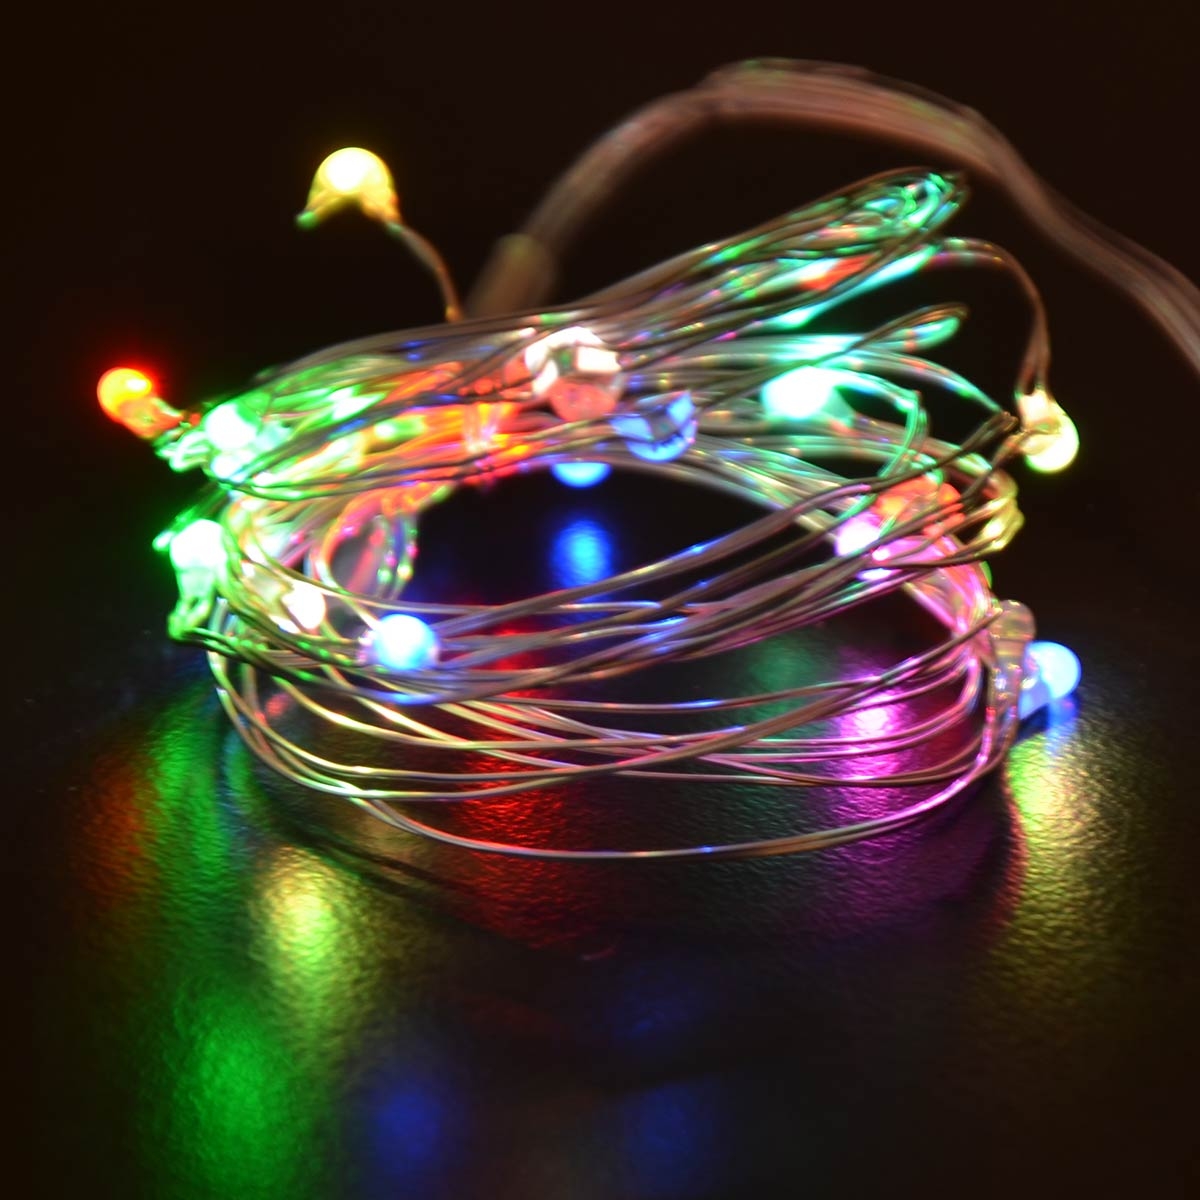 String Decoration Light Multi Color (Red, Green and Blue) Flashing Lights 20LED (2M) Battery Operated for Christmas, Wedding and Parties